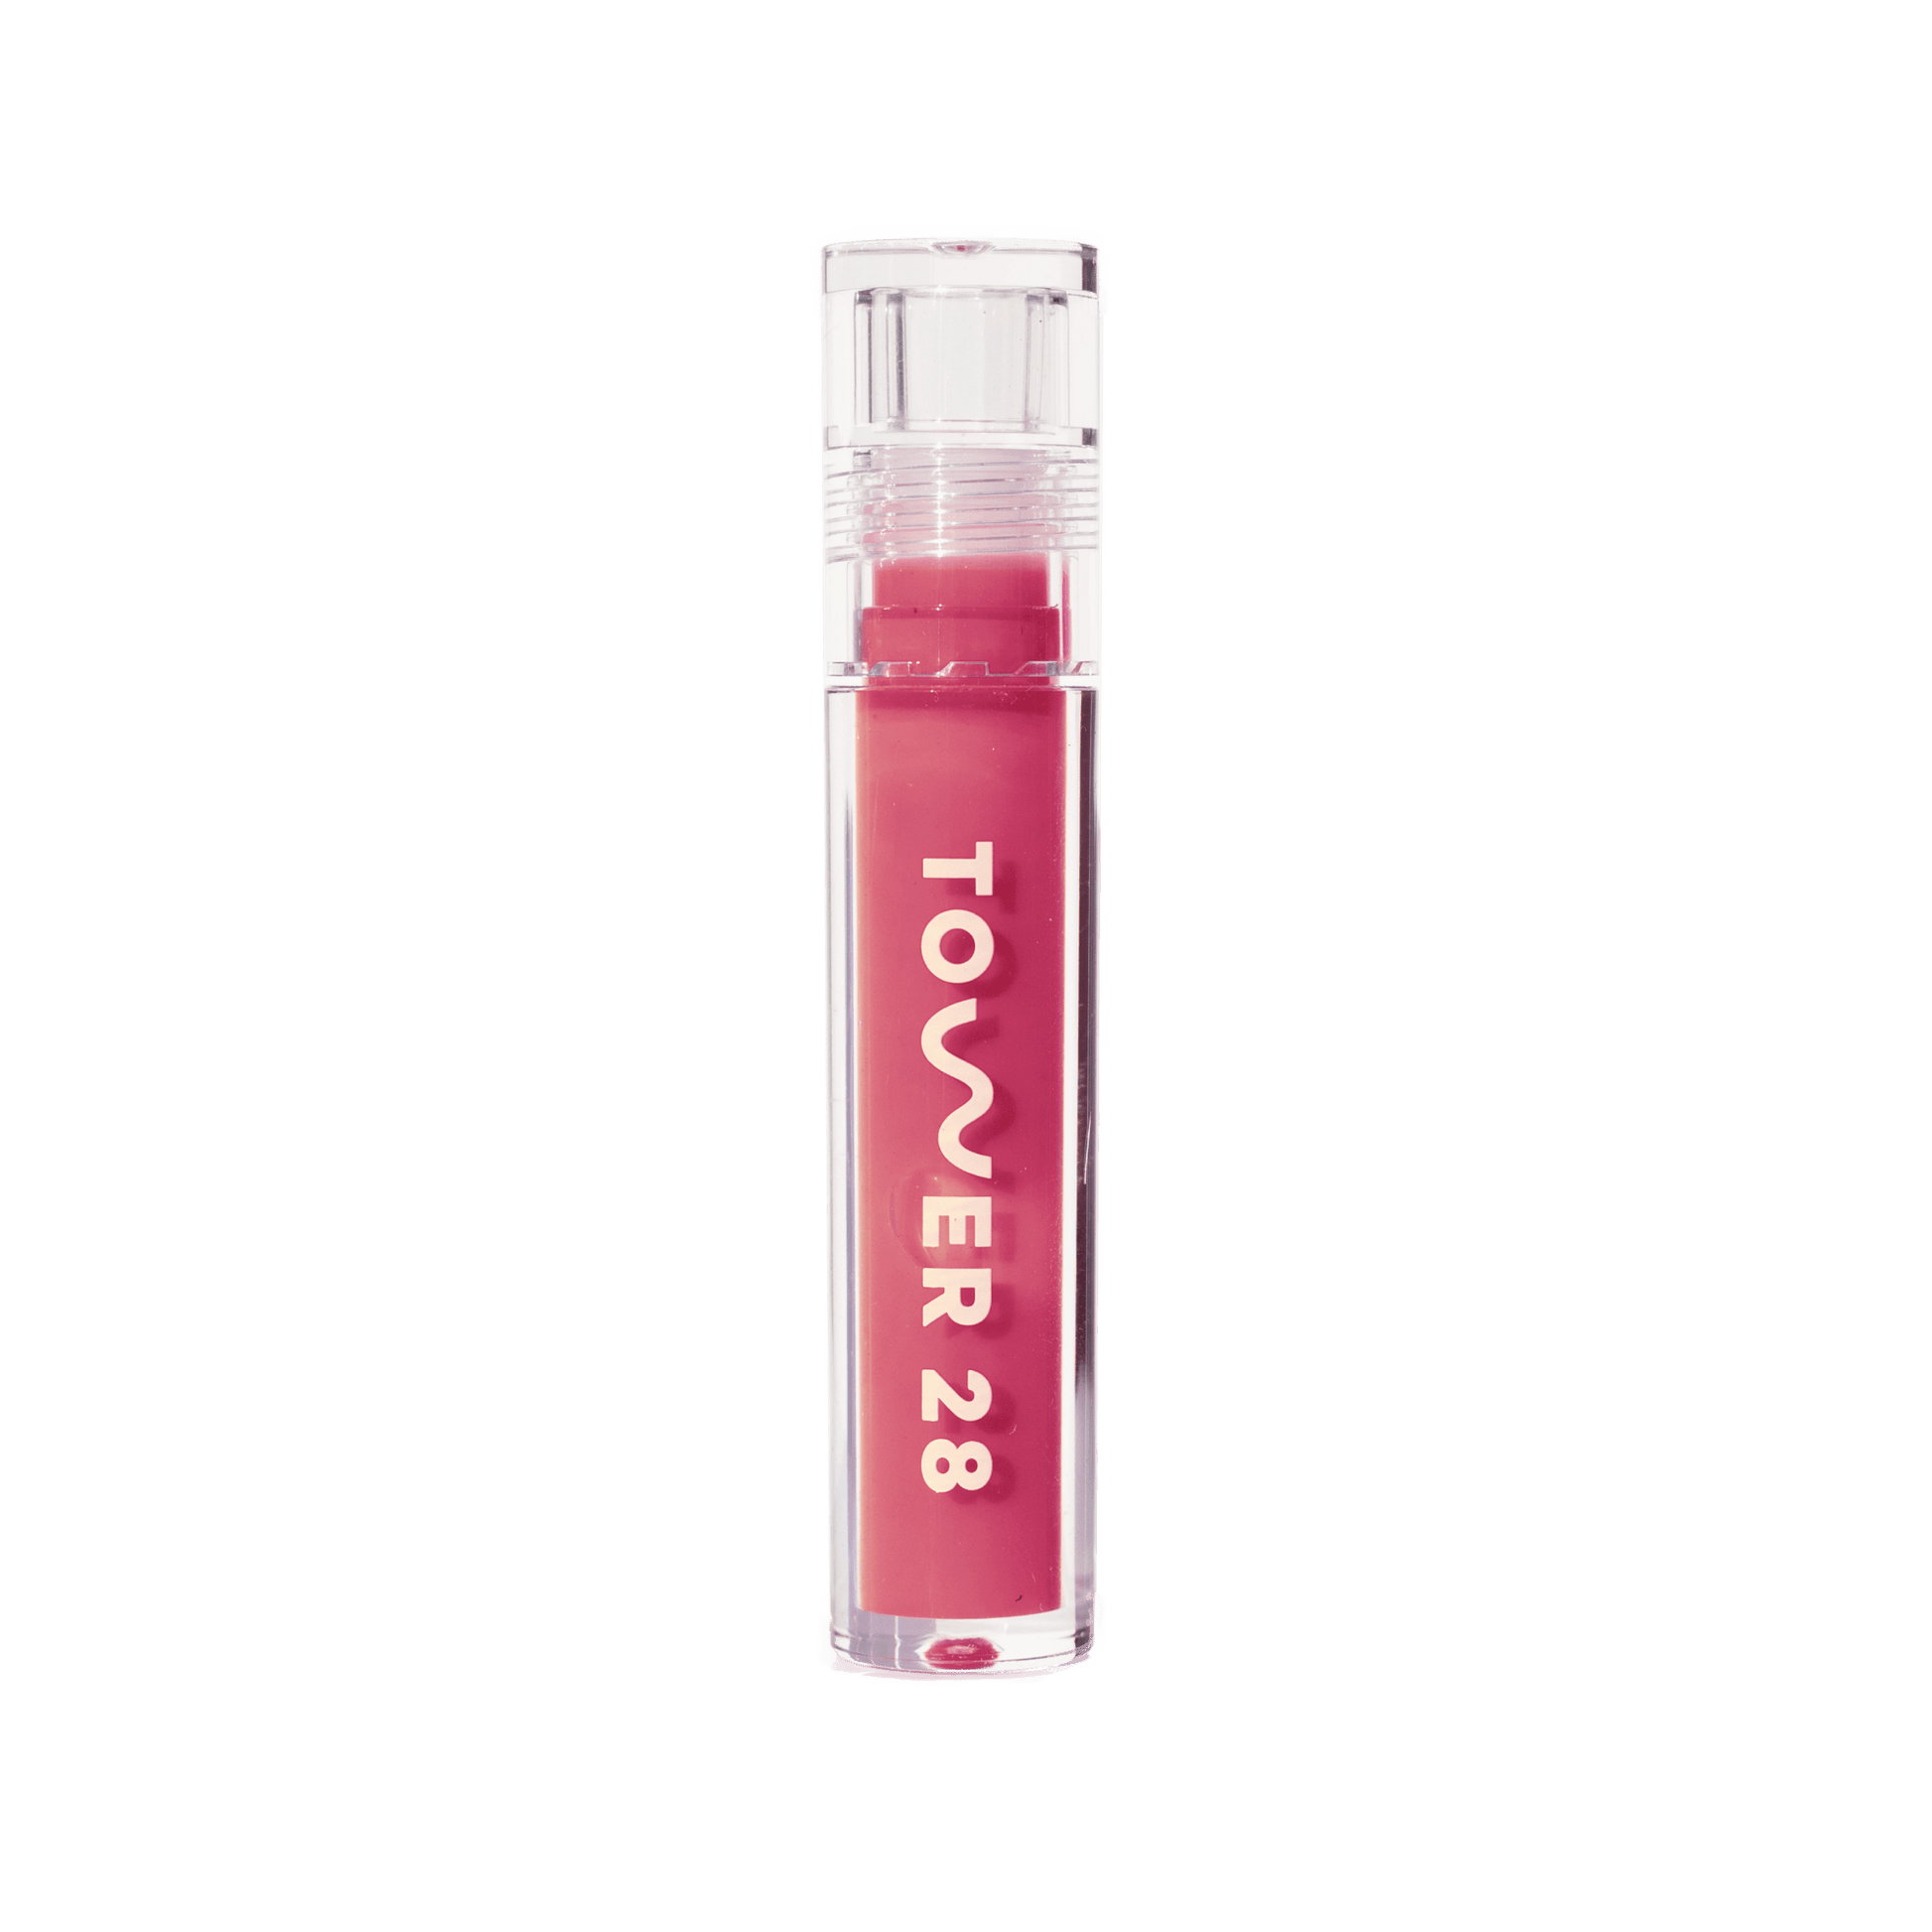 The Tower 28 Beauty ShineOn Lip Jelly in the shade Coconut